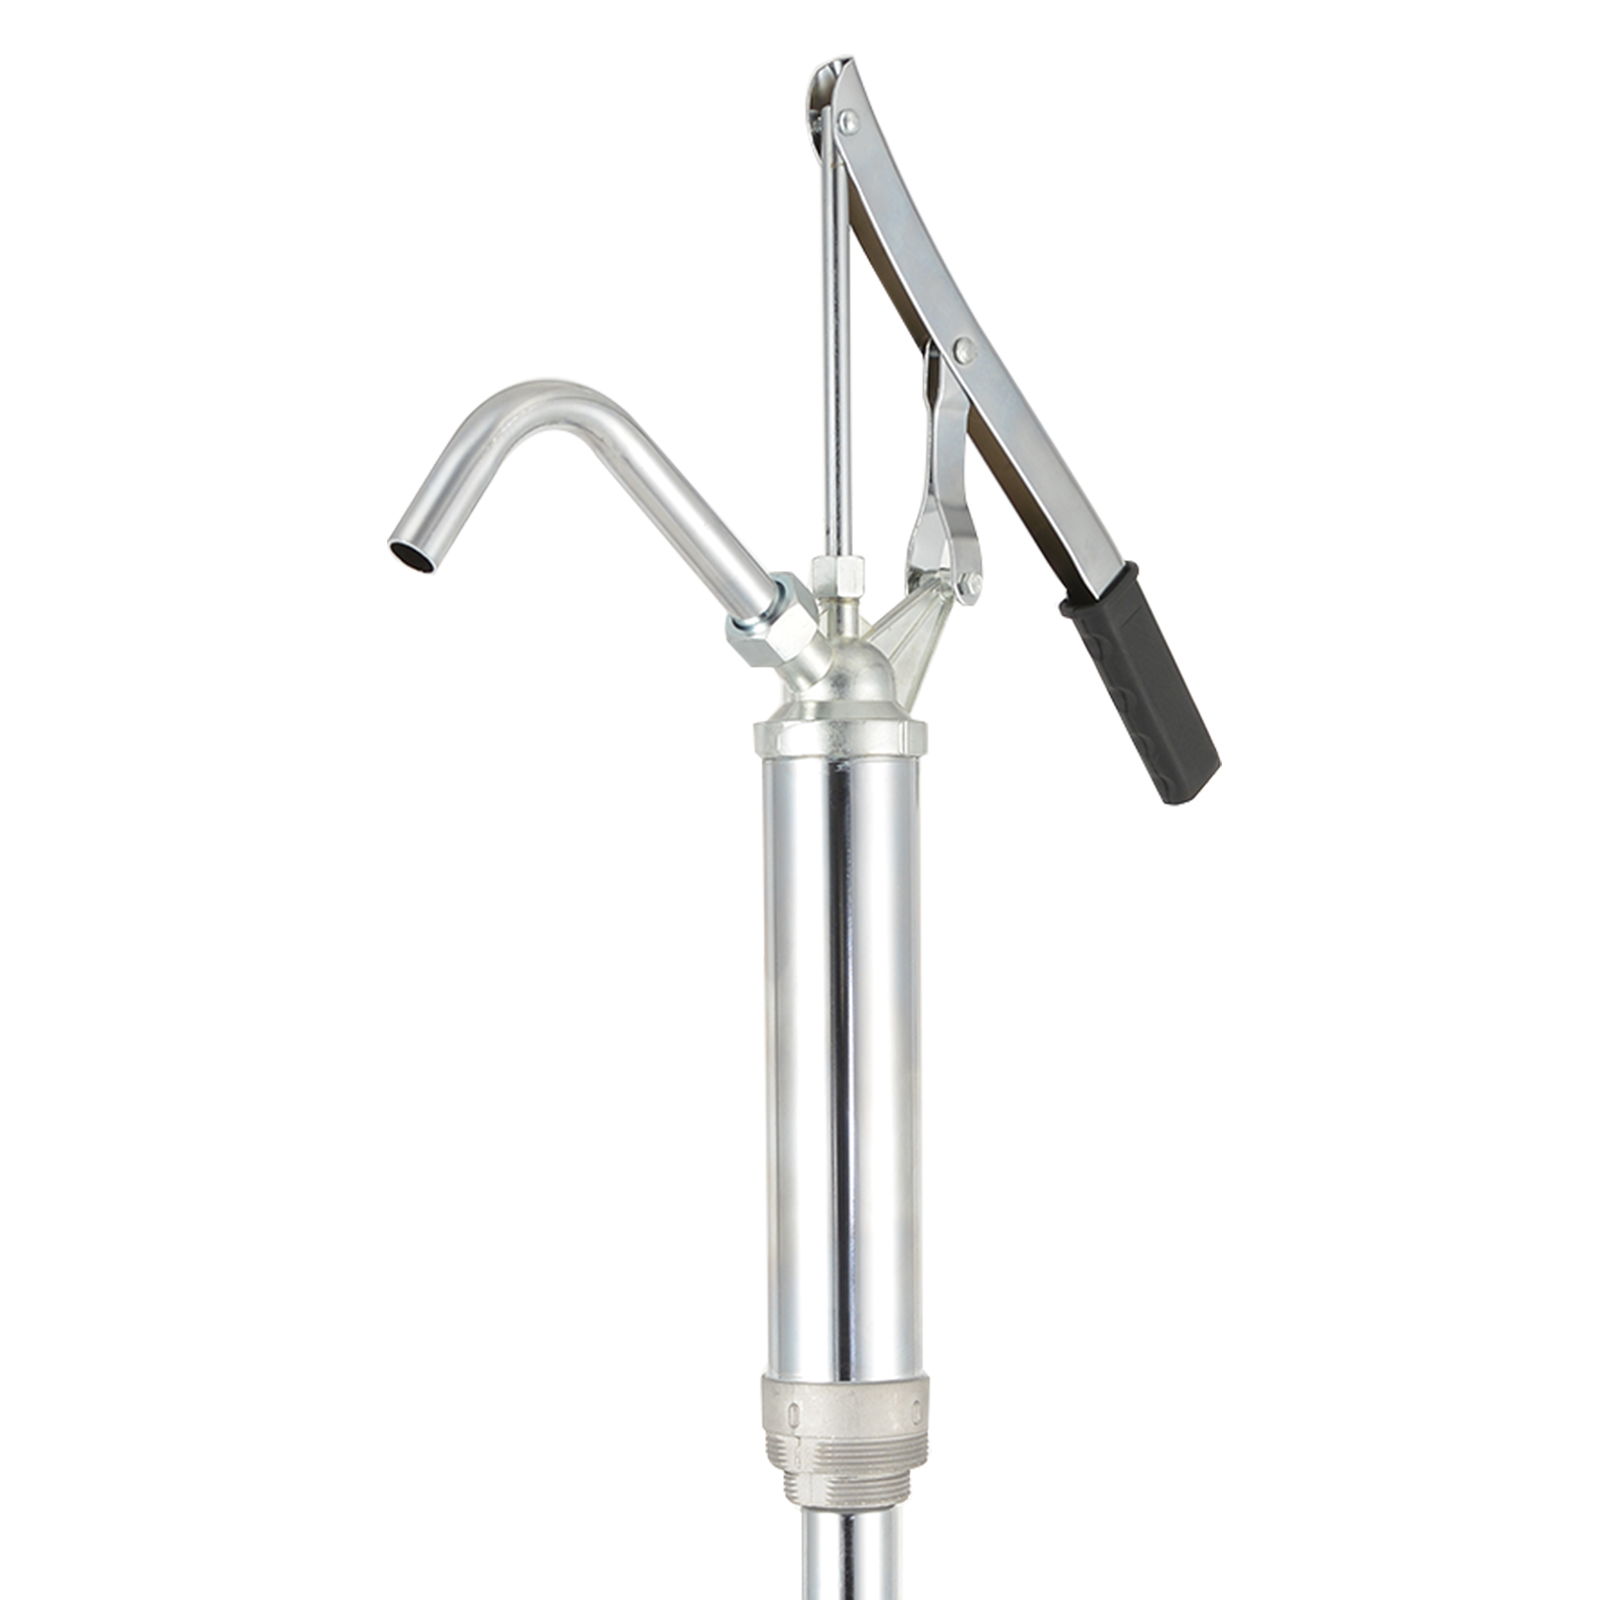 New Lever hand Oil Pump Barrel Pump Oil Fluids / Diesel 55 Gallon Drums Telescopic Suction Tube For Drums Up 55 Gal